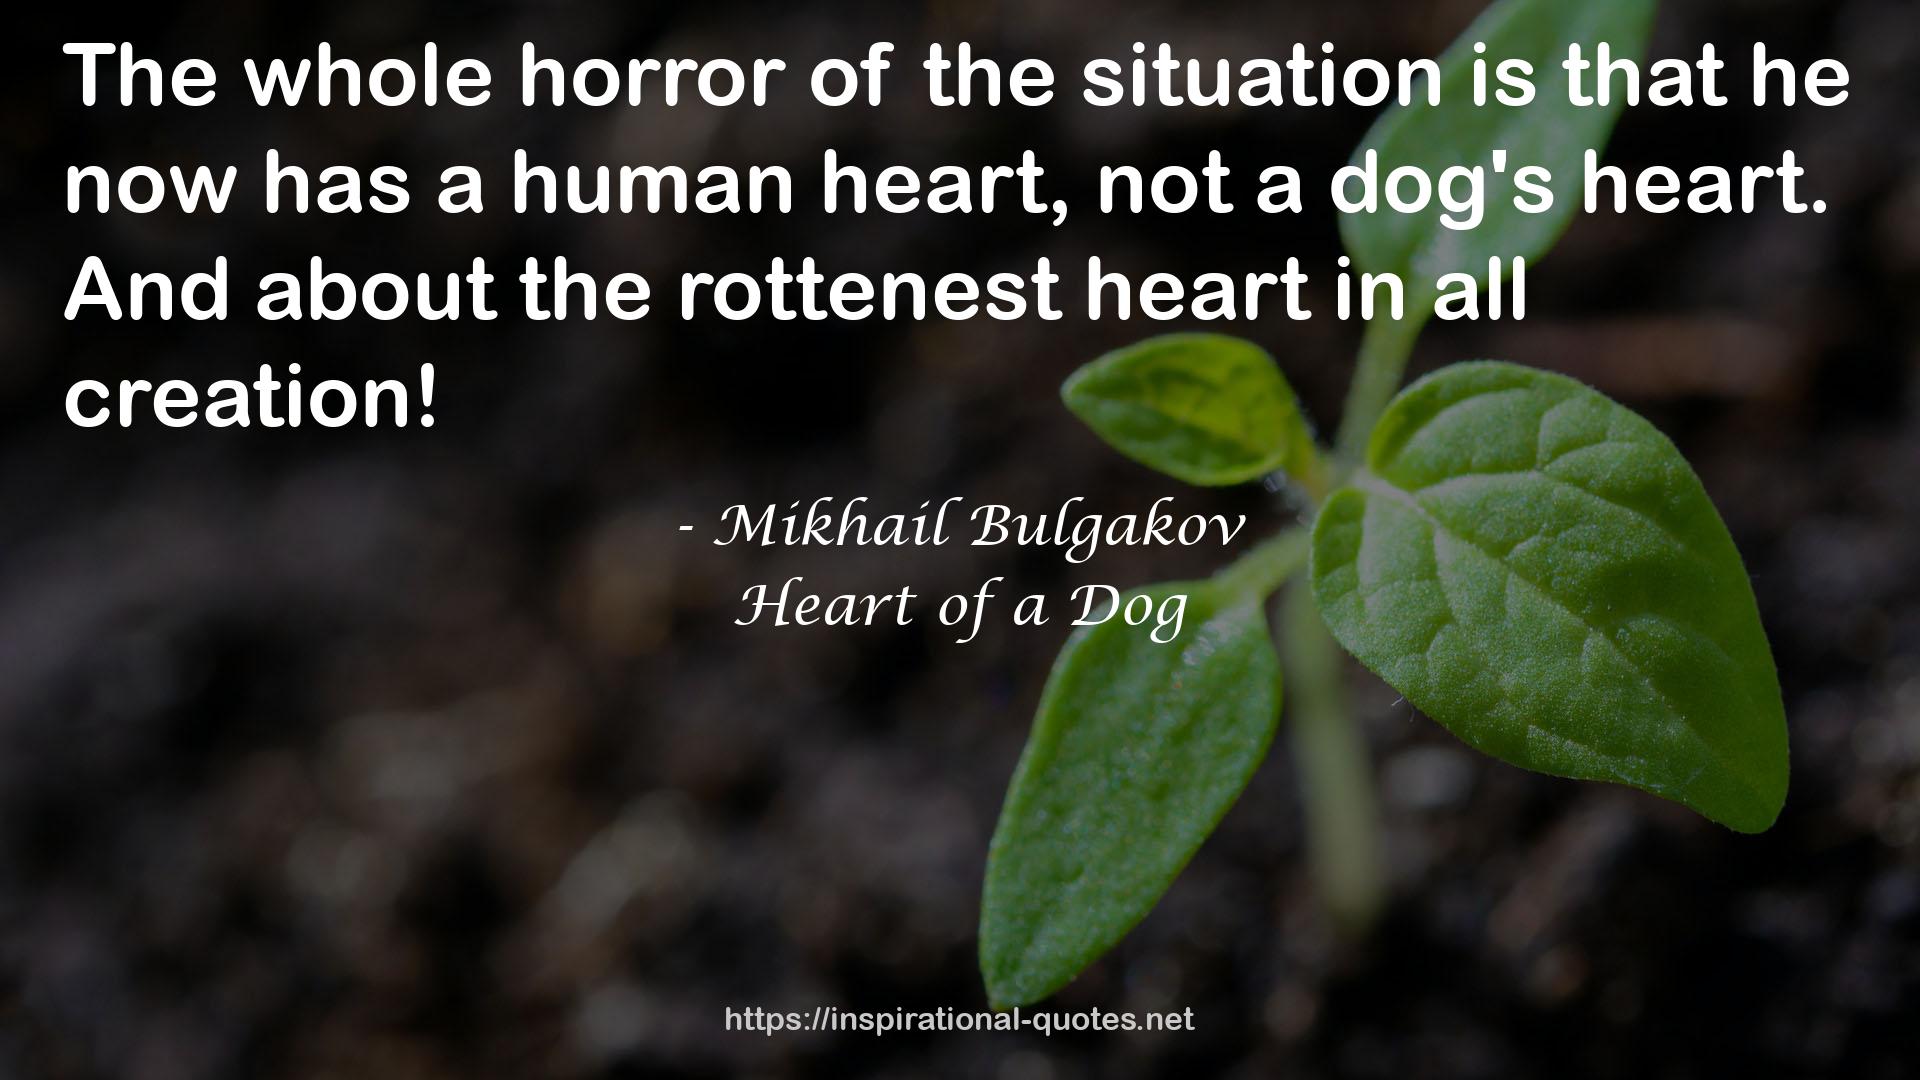 Heart of a Dog QUOTES